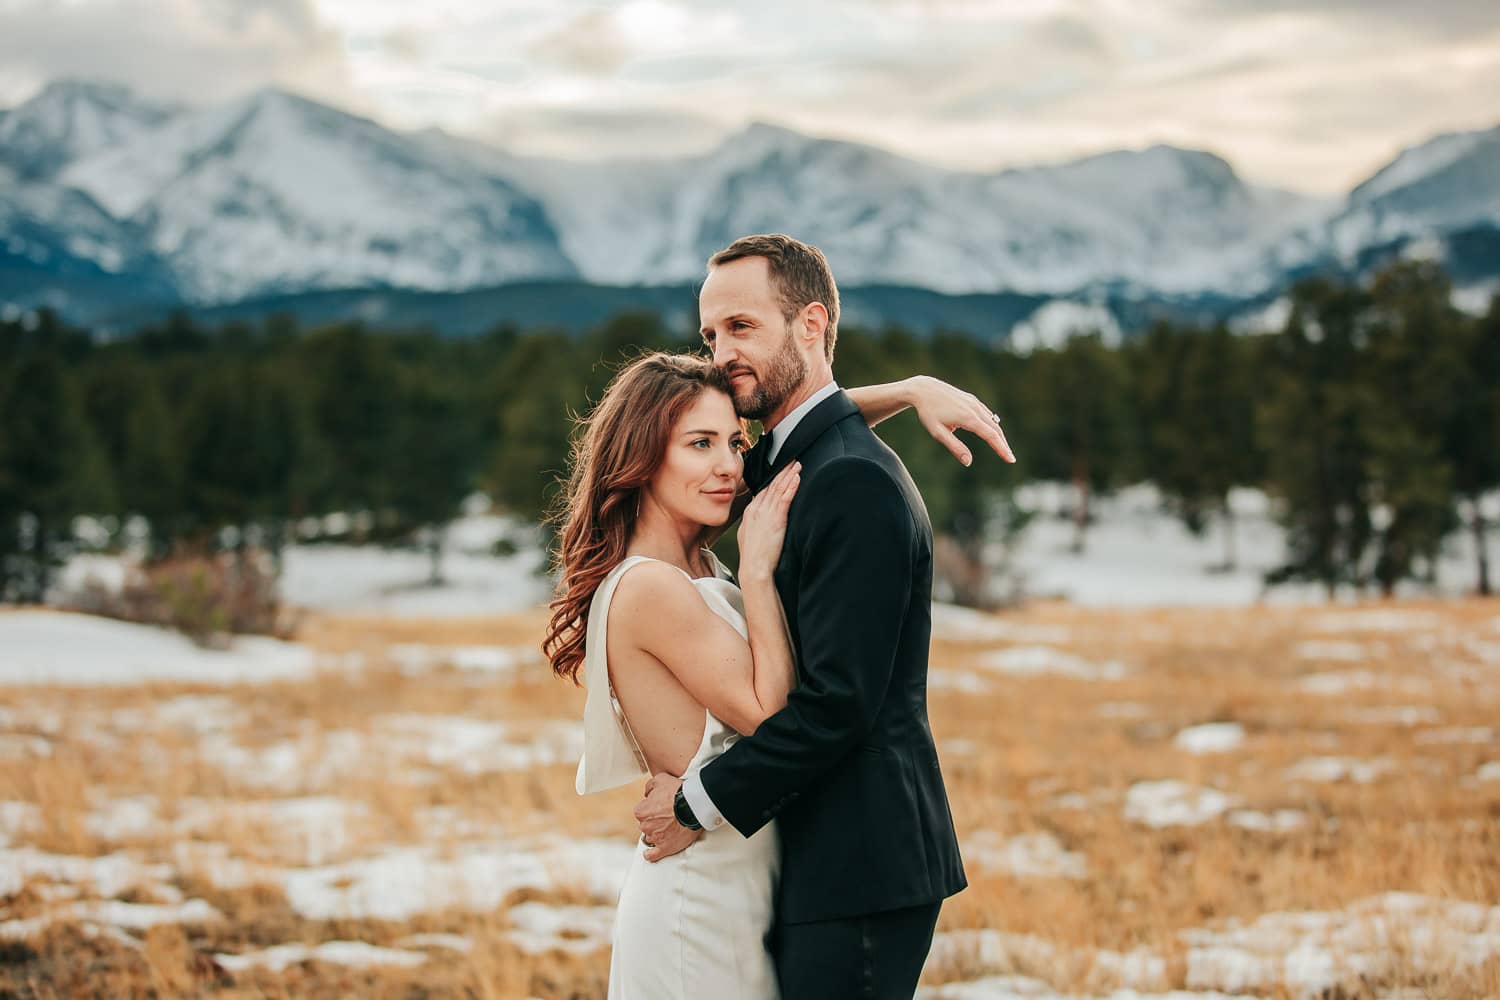 A couple in wedding attire standing close to each other, looking in opposite directions. The sun is setting over the colorado mountains behind them.